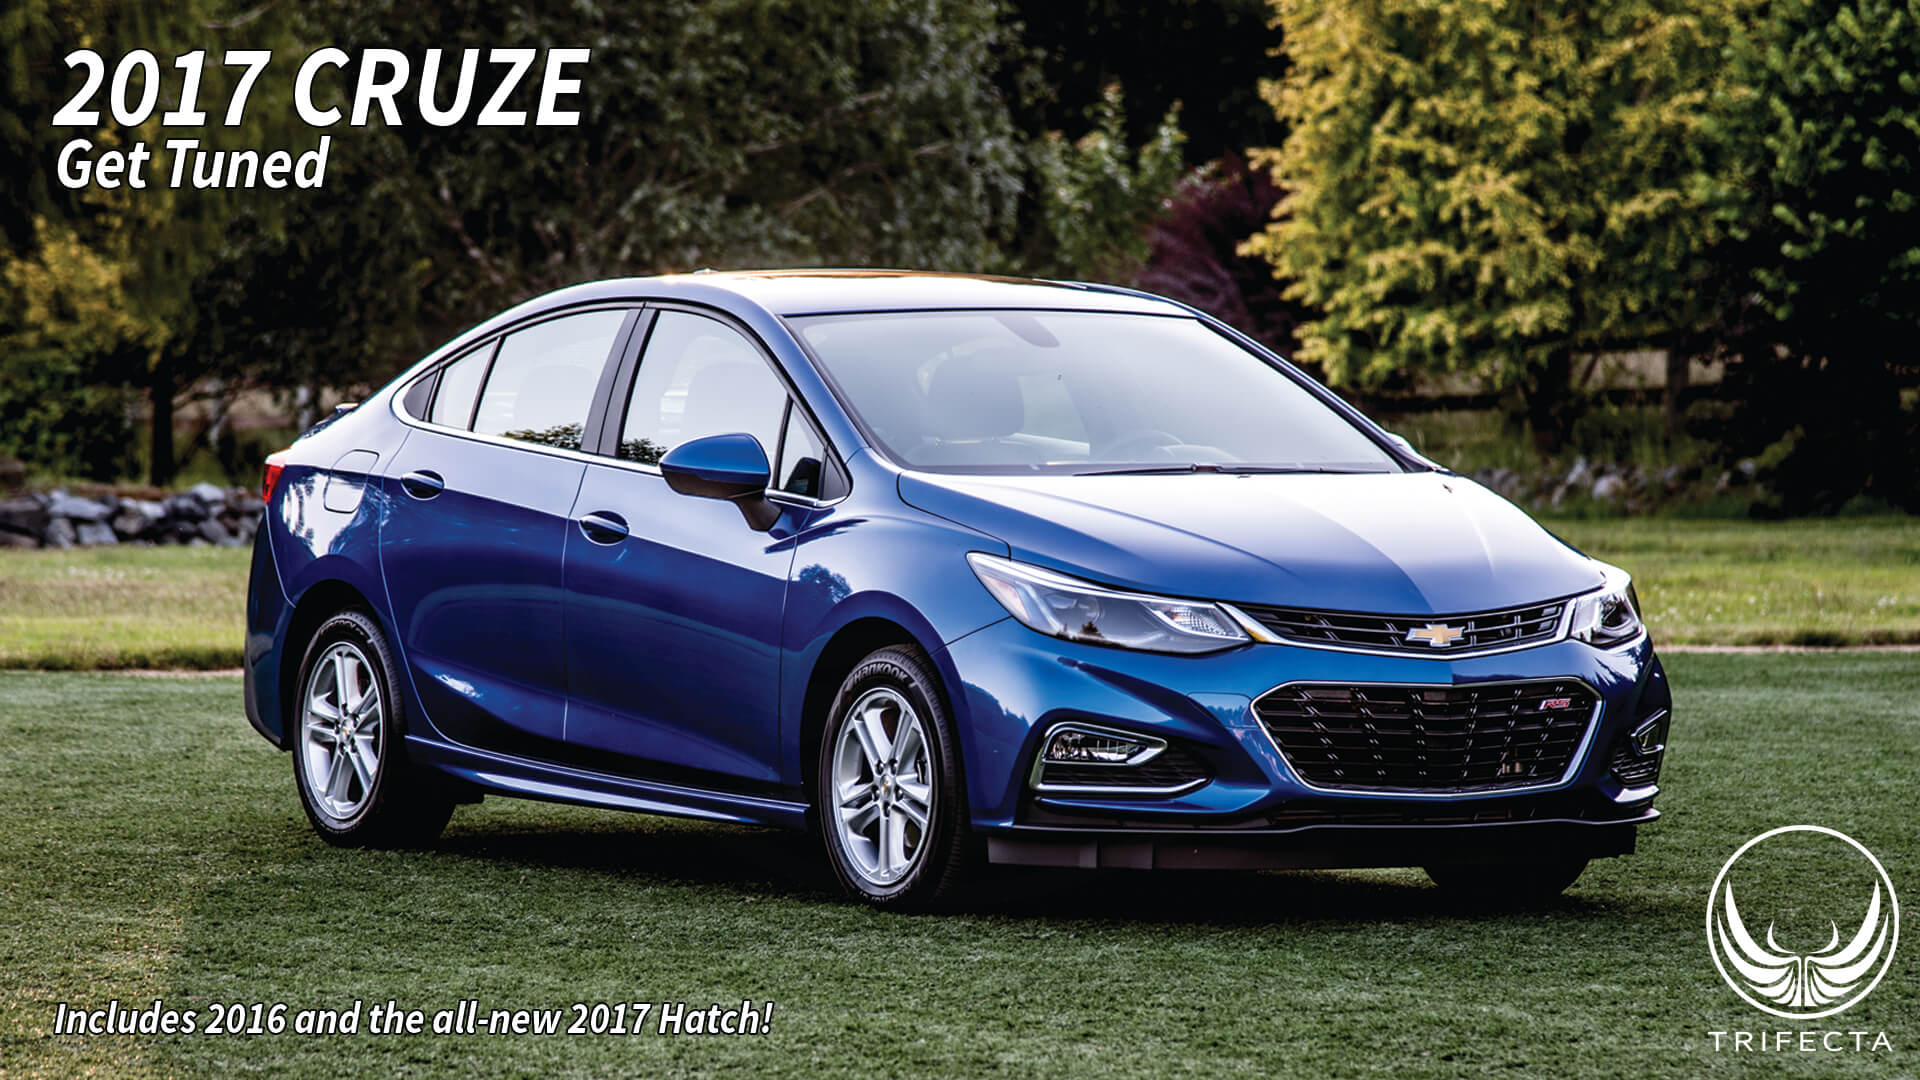 TRIFECTA 2017 Cruze and Cruze Hatch Now Available! News